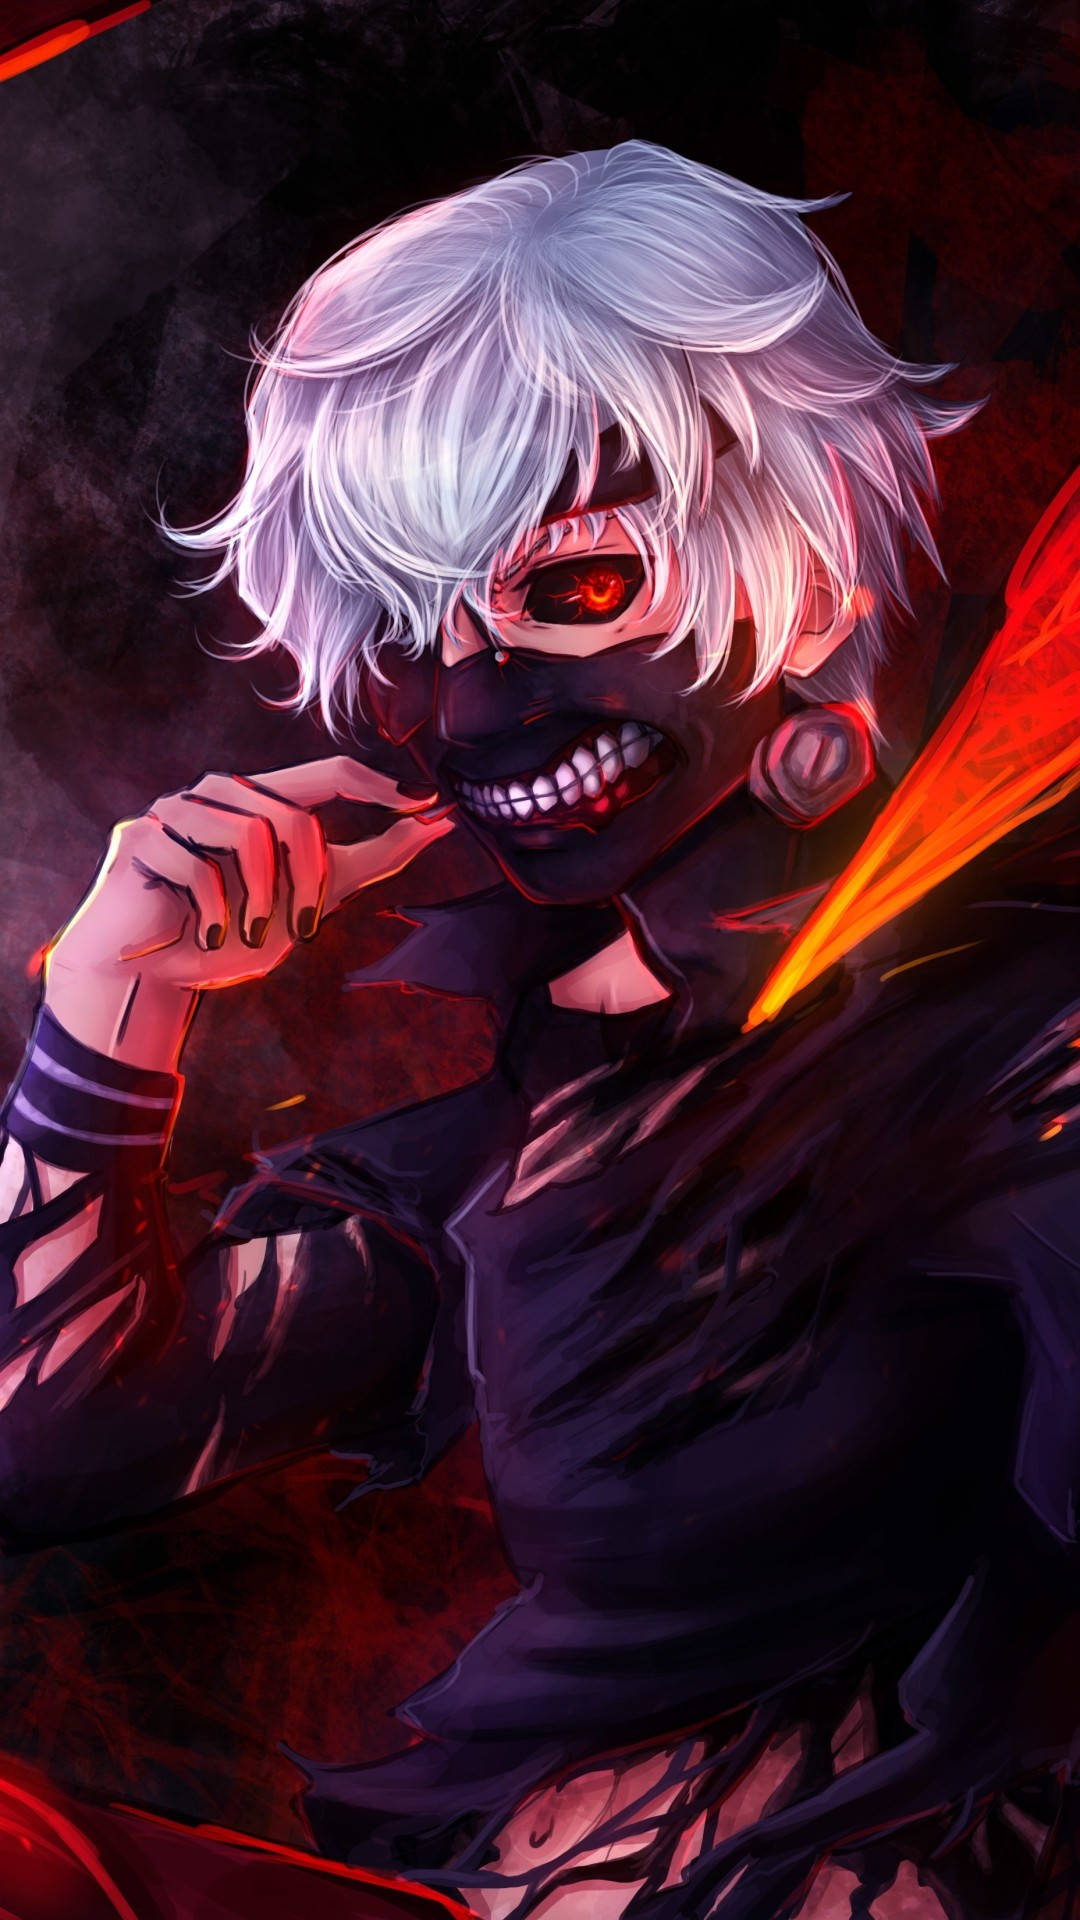 Dark And Creepy Tokyo Ghoul Iphone Background Wallpaper